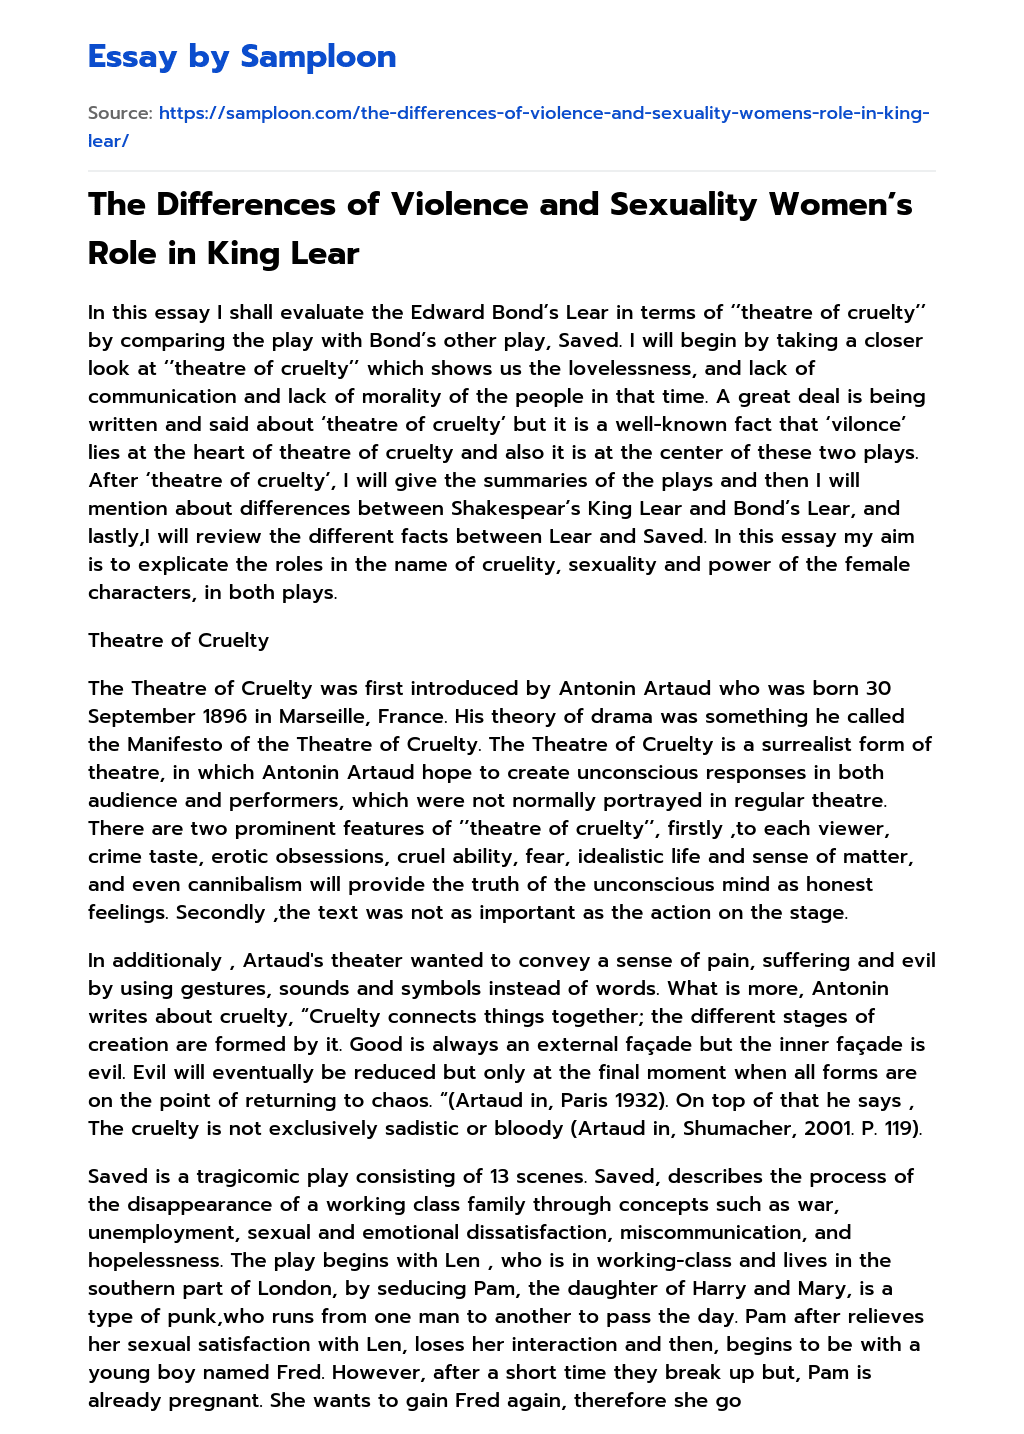 The Differences of Violence and Sexuality Women’s Role in King Lear essay